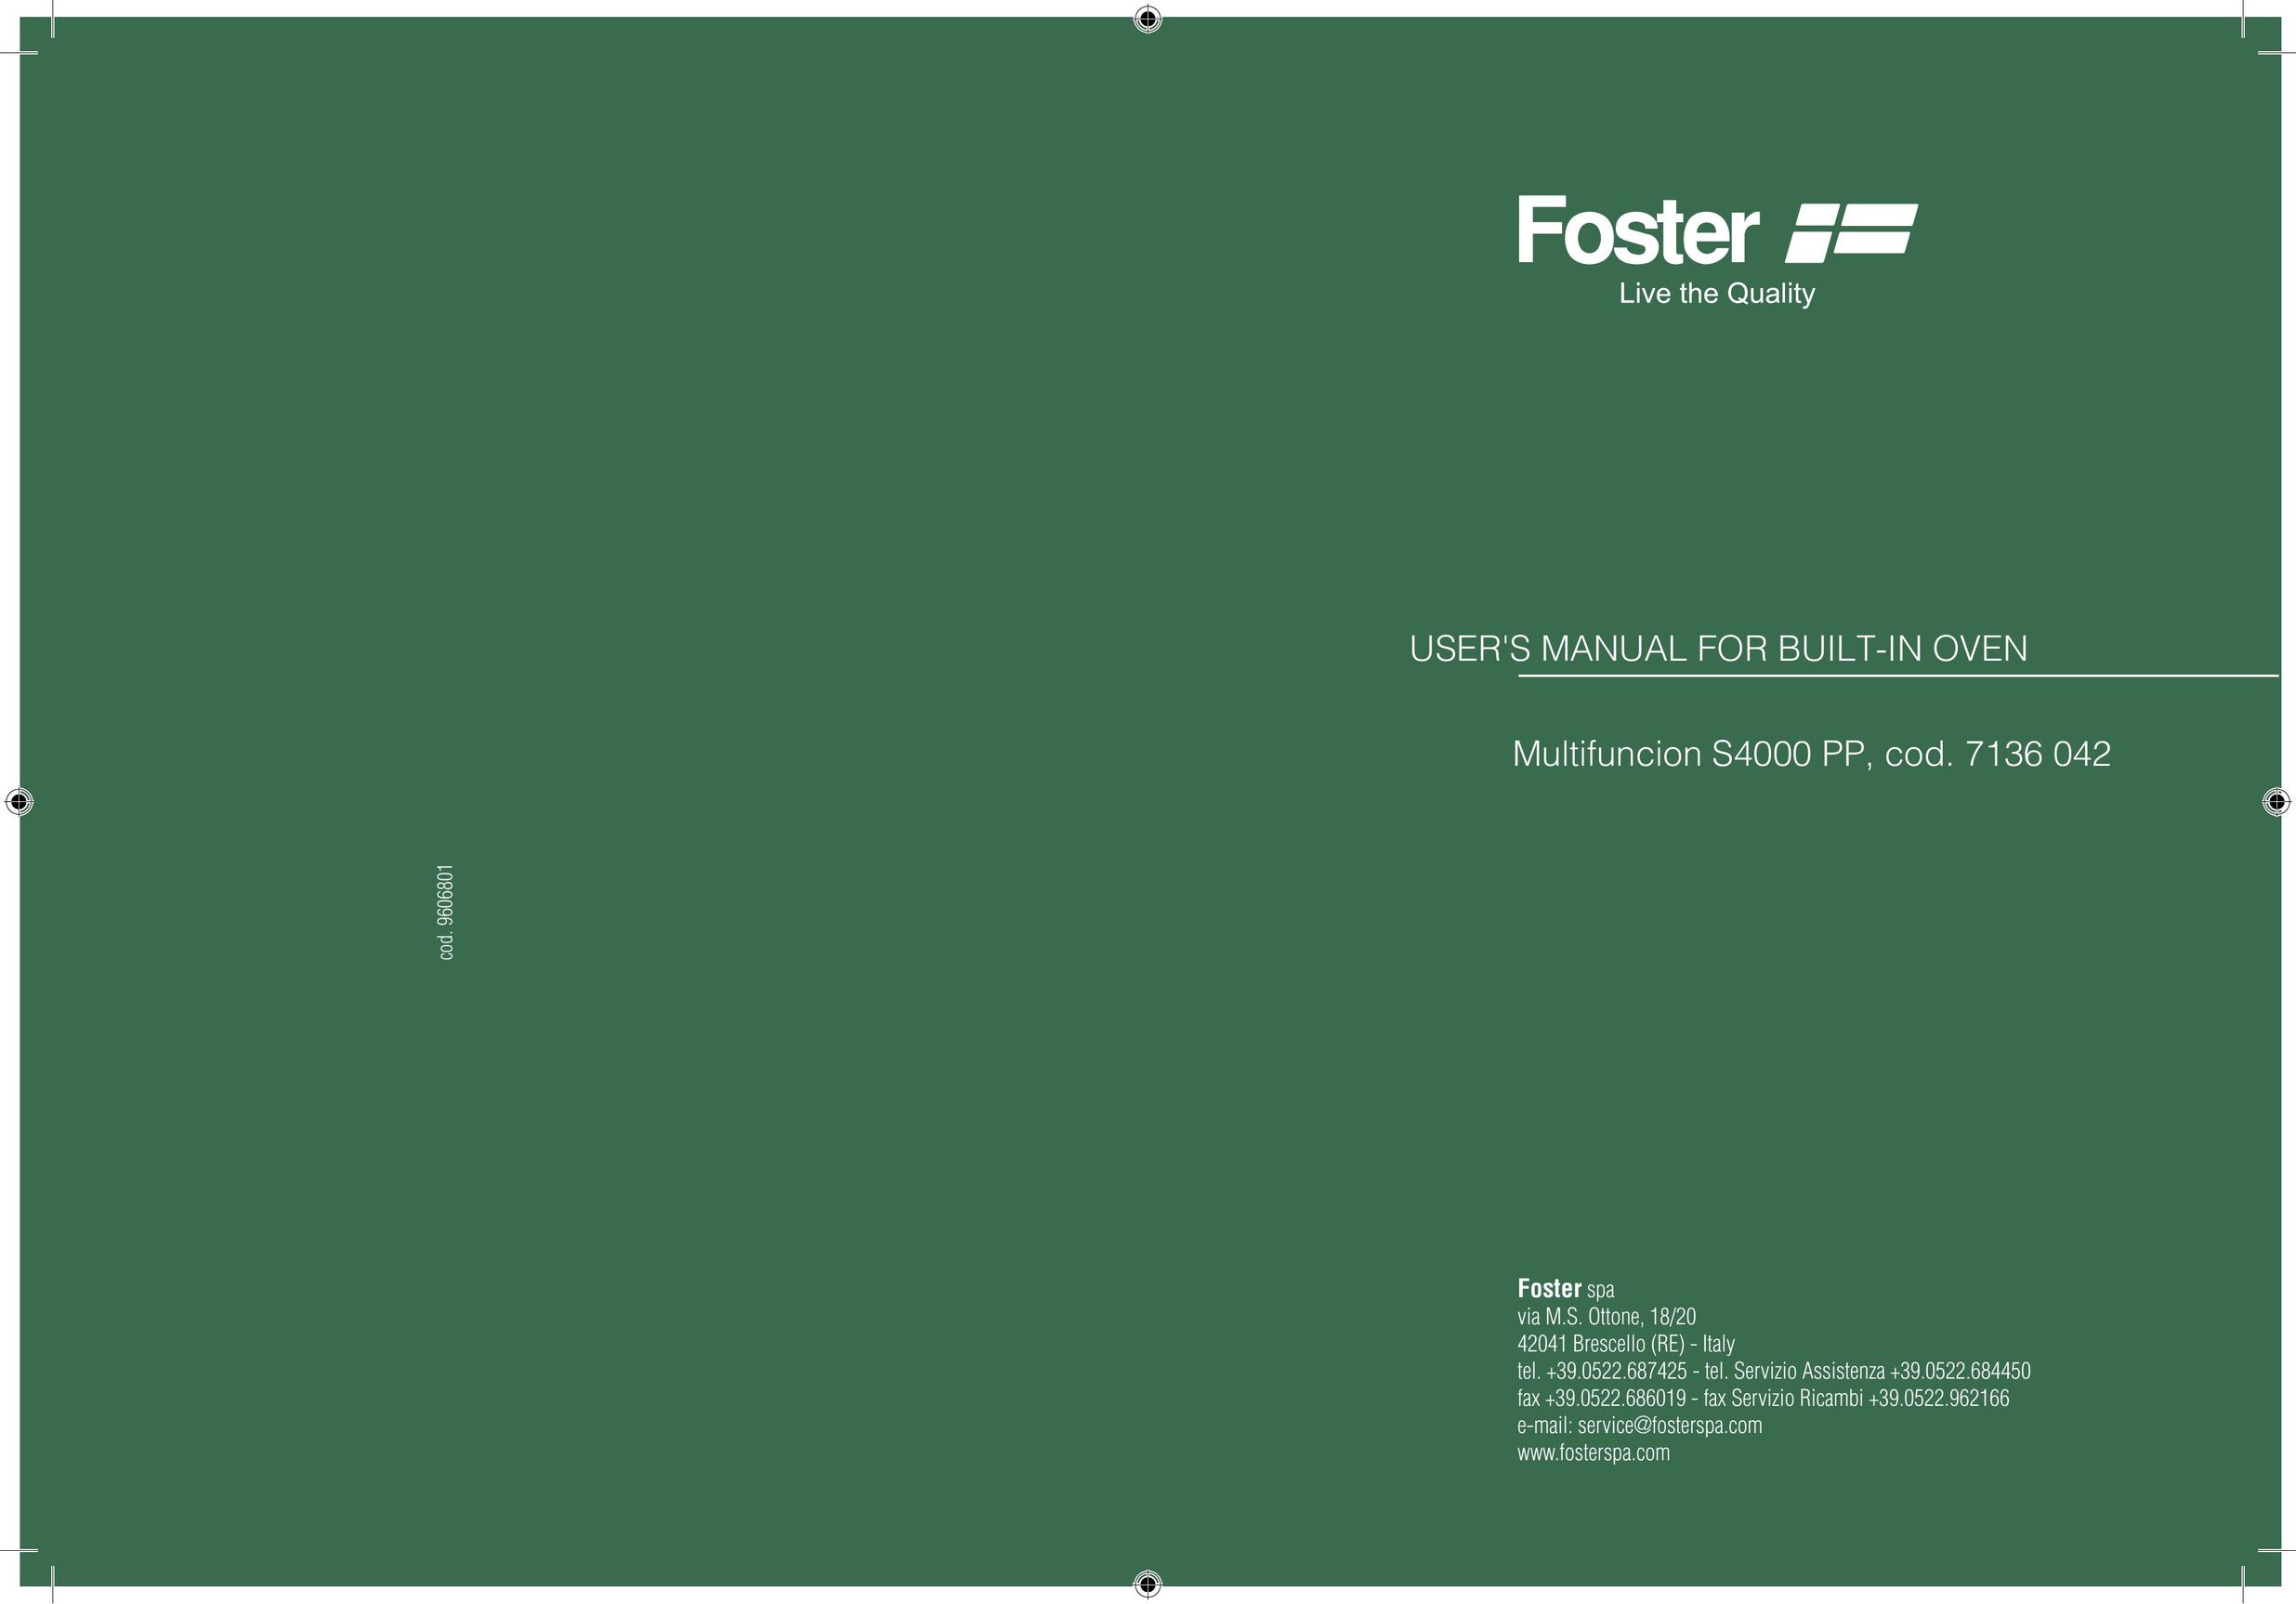 Foster S4000 PP Oven User Manual